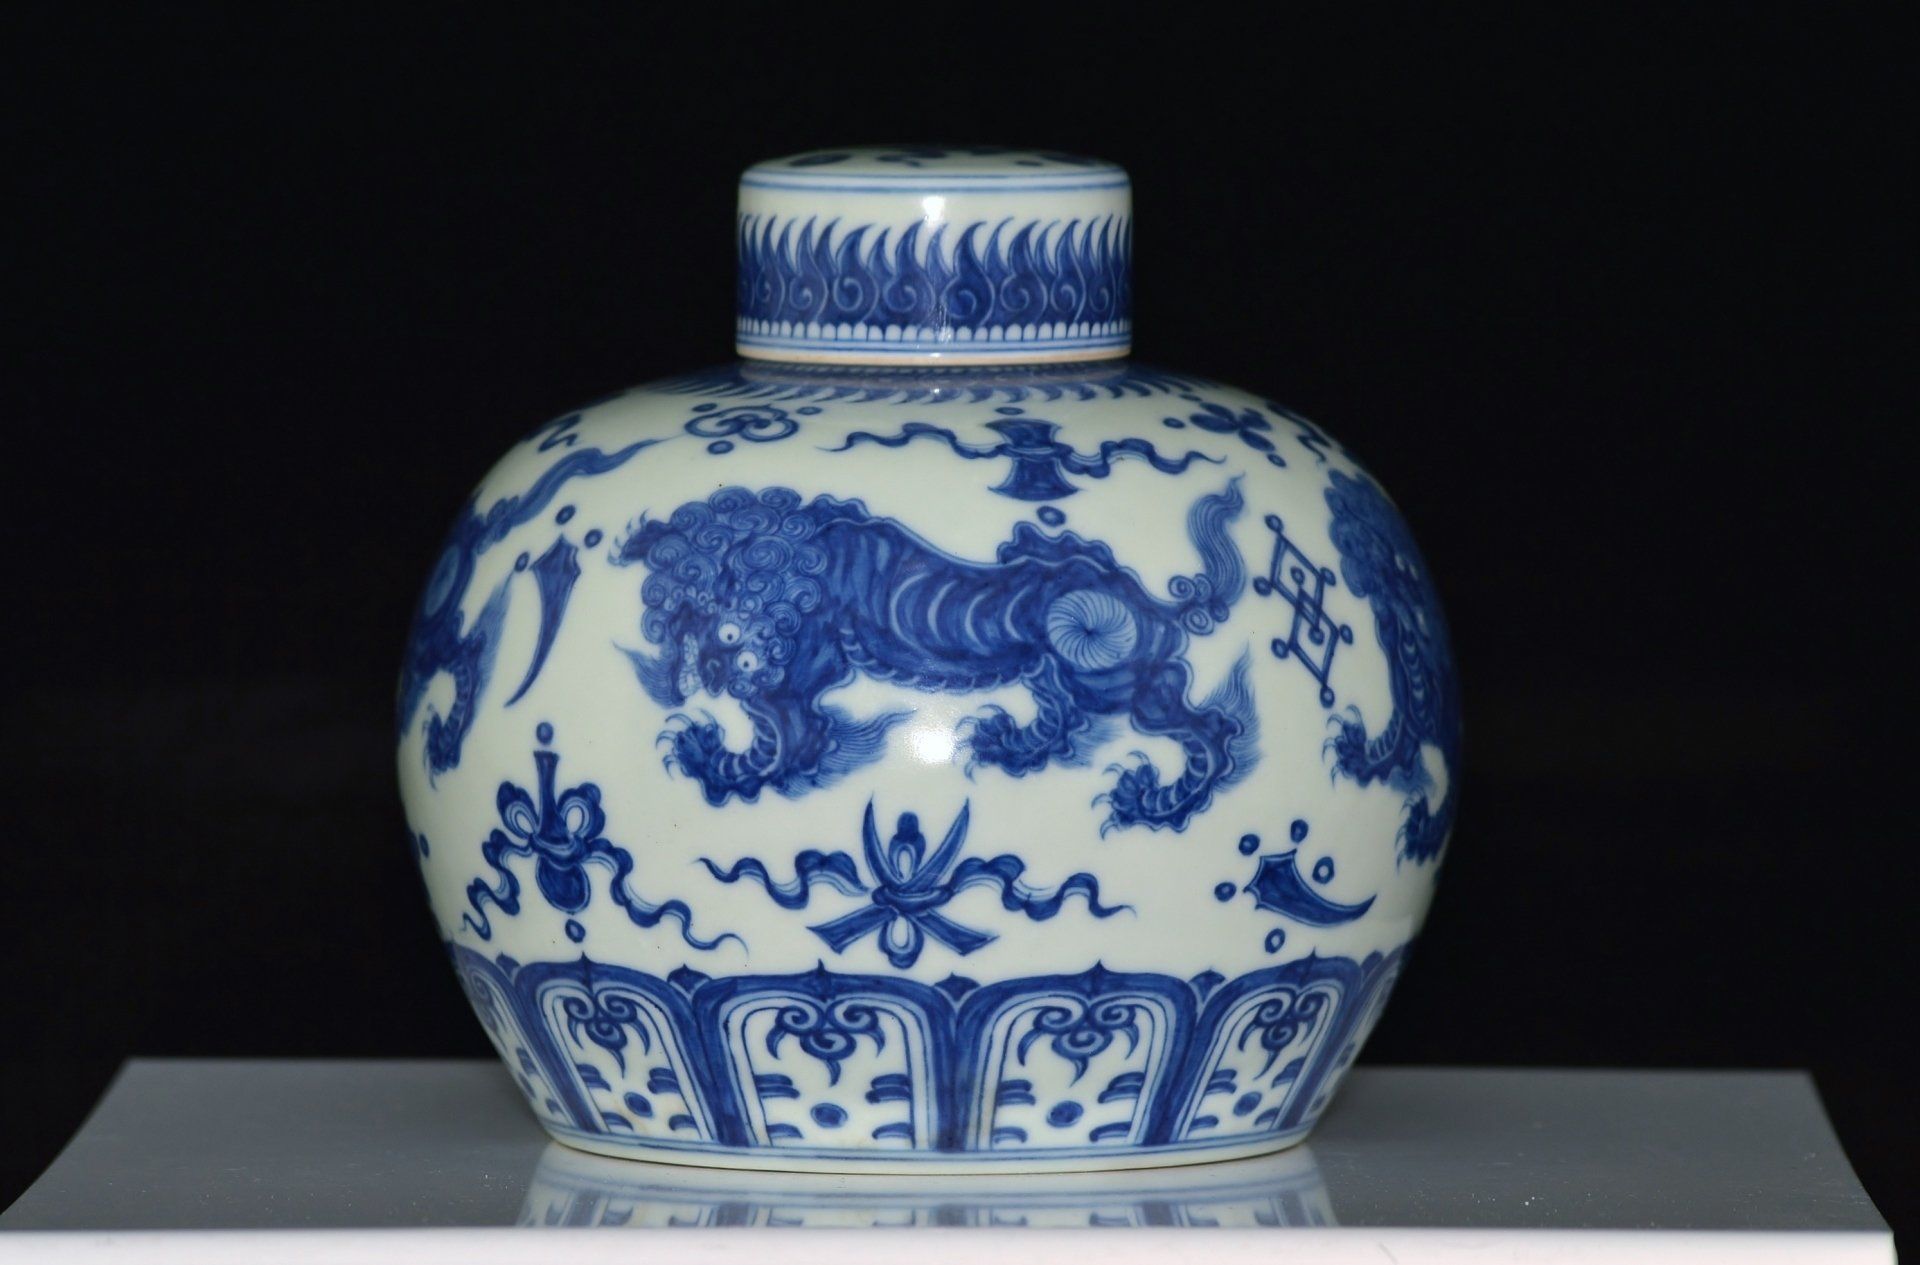 Authenticating Ming Dynasty Imperial Chenghua Blue & White and Doucai Wares